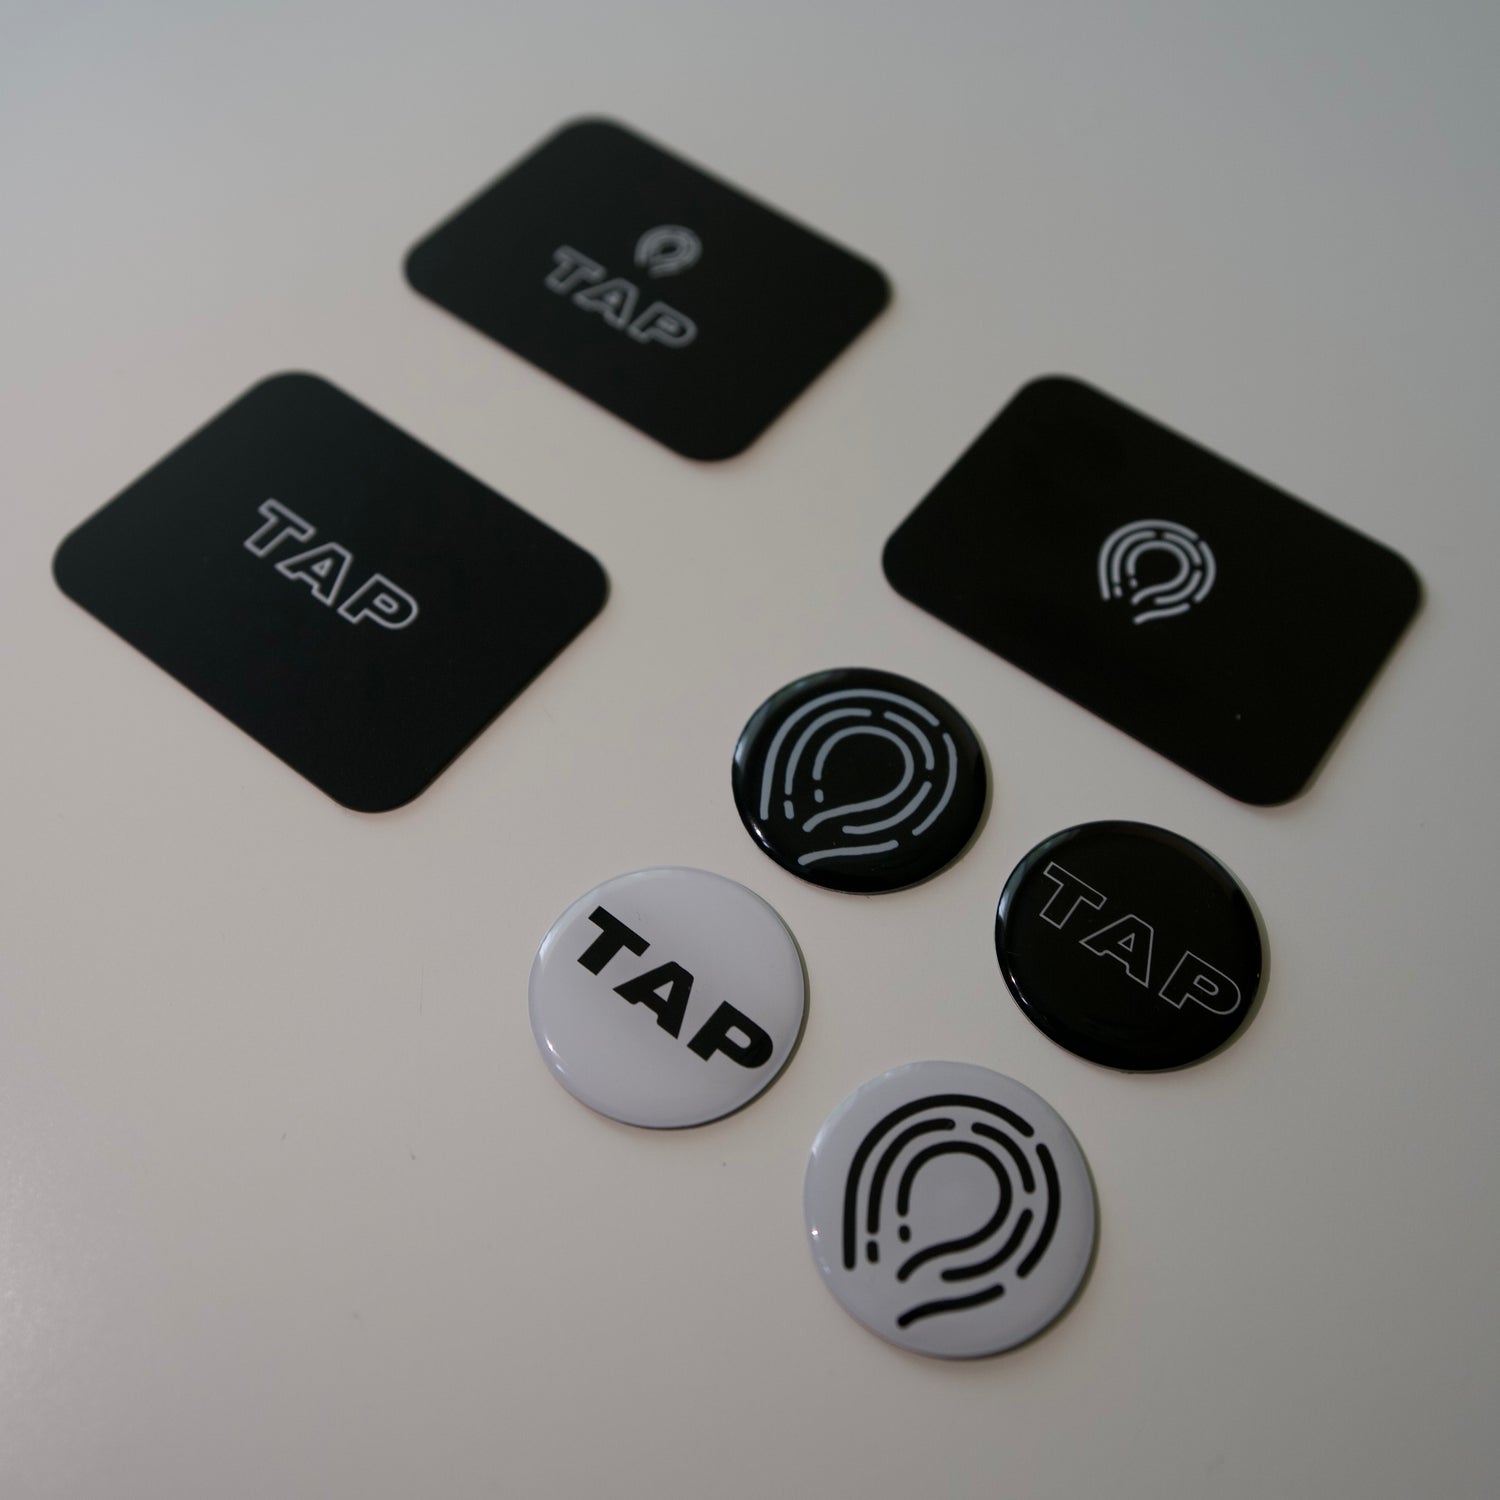 Black and white photo of four NFC tags alongside three NFC business cards, showcasing minimalist design and modern connectivity solutions.